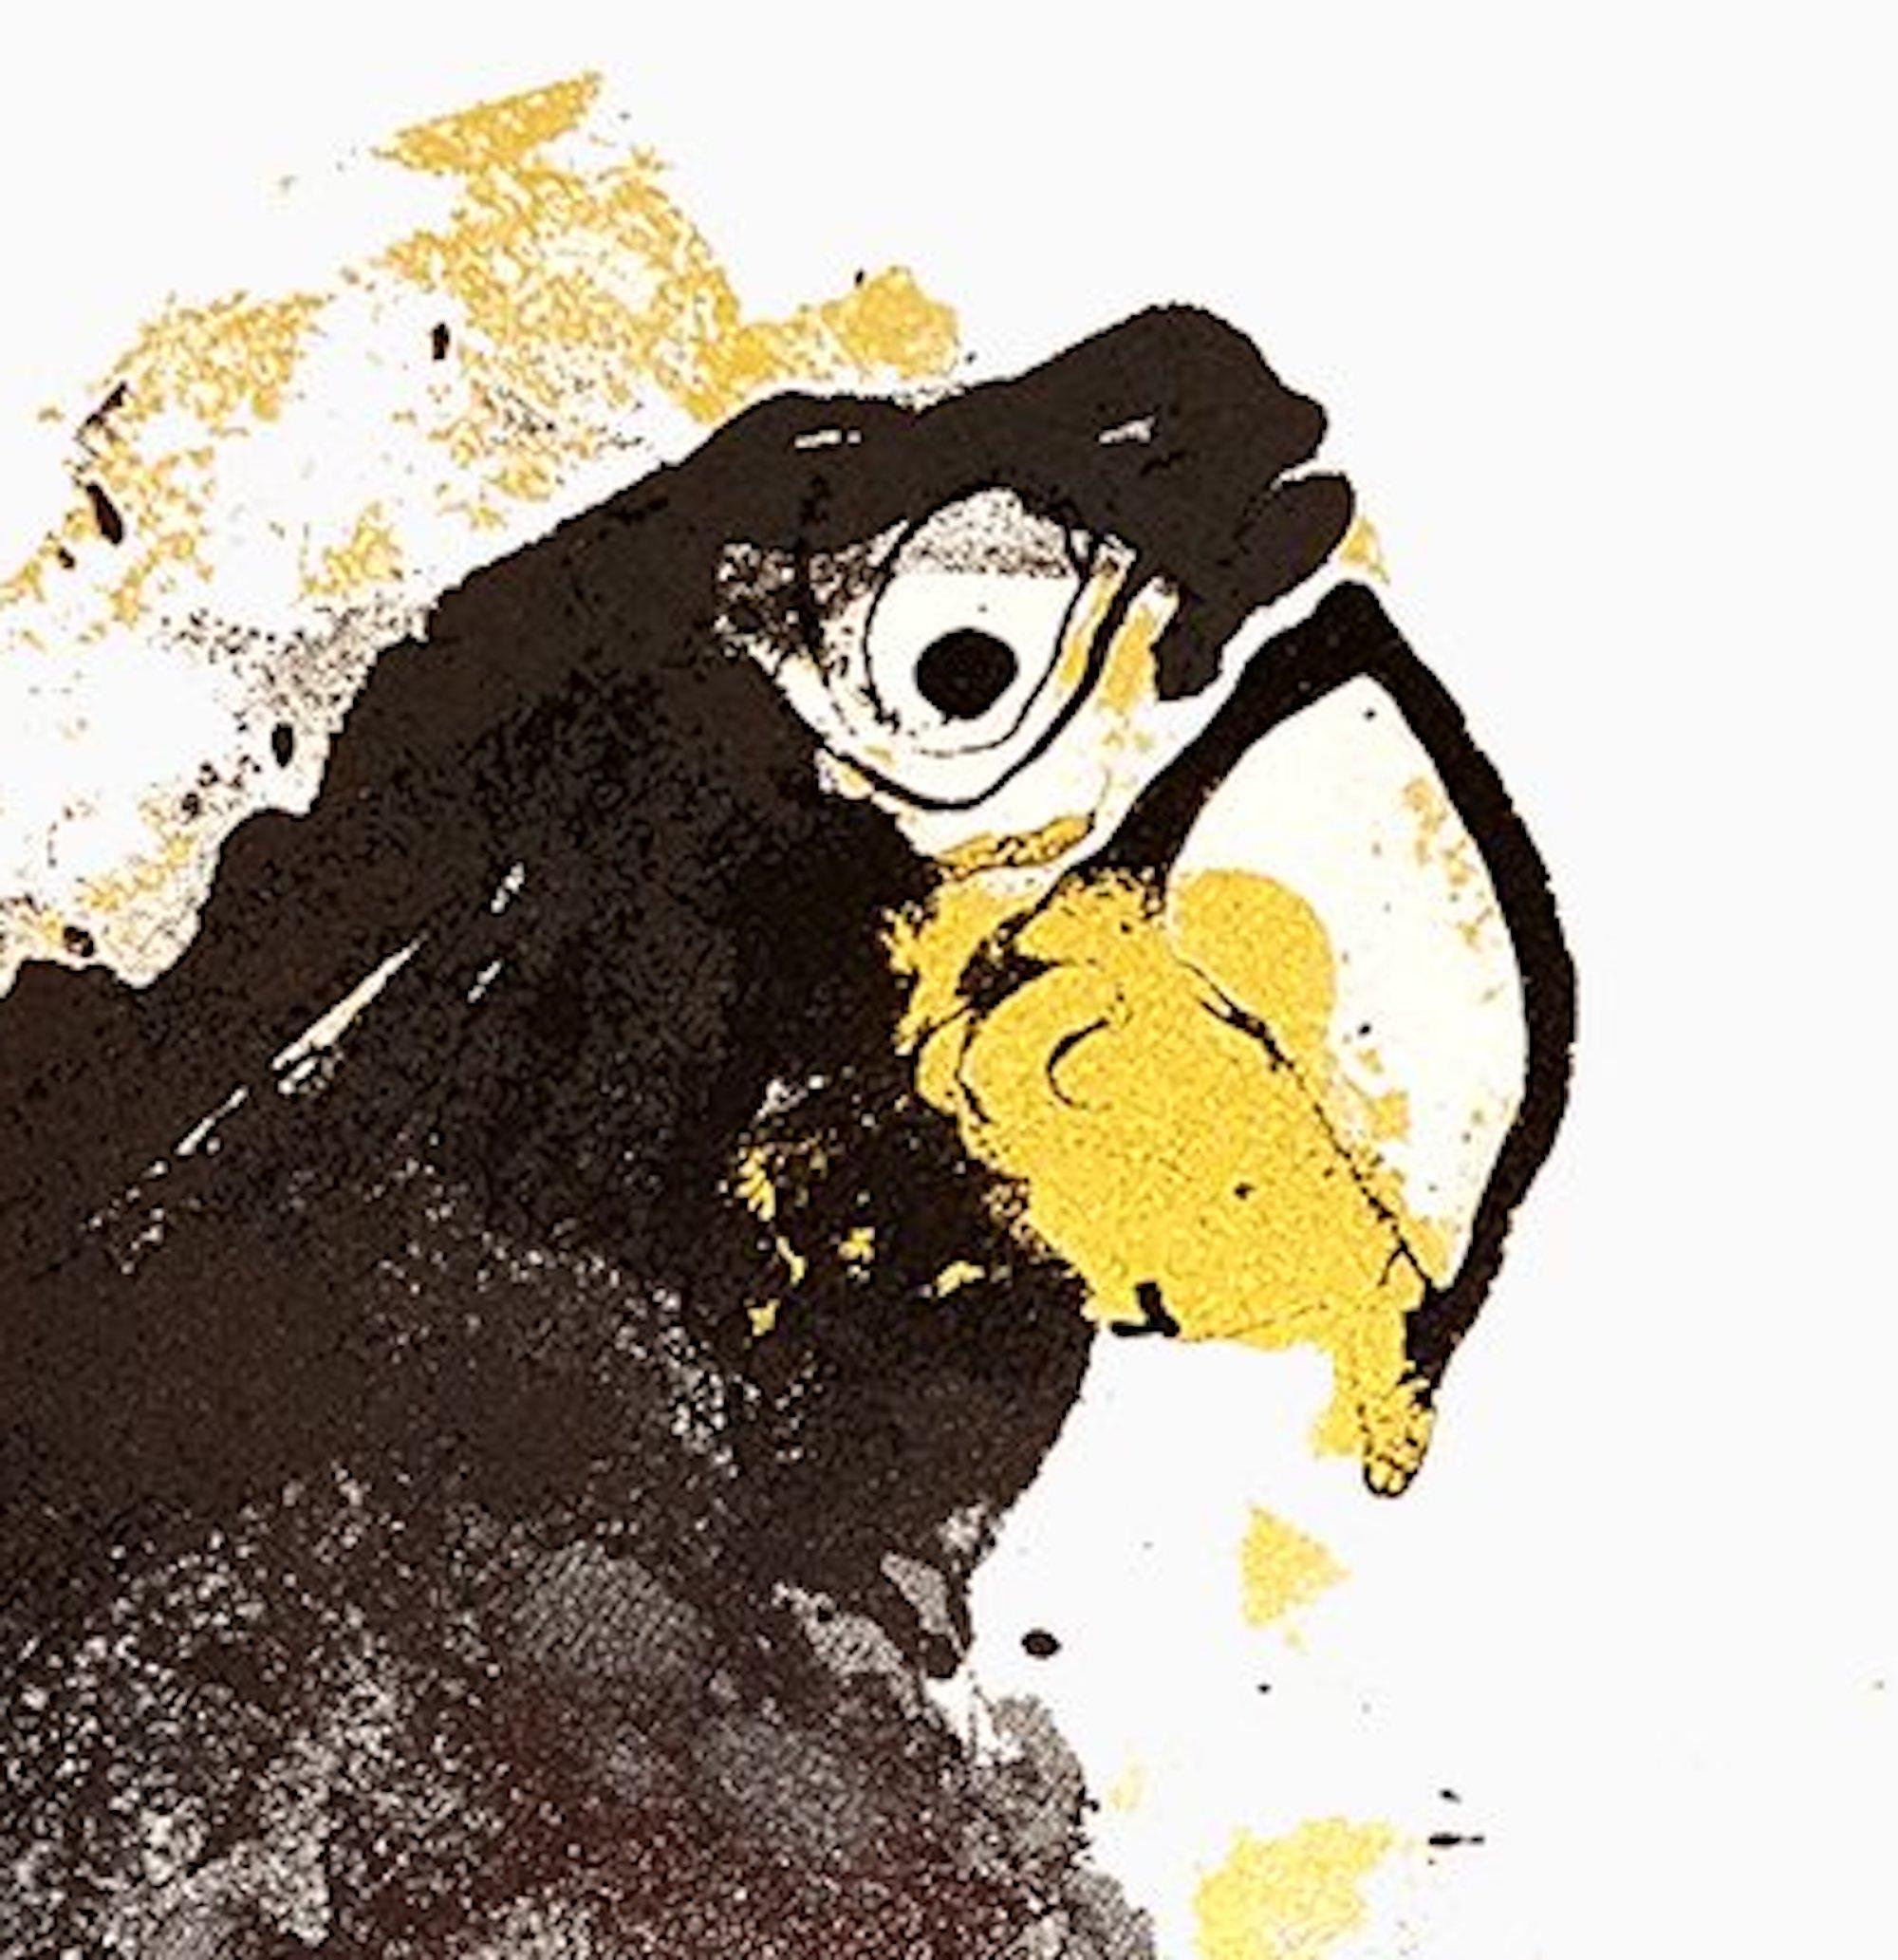 Parrot Gold, edition of 50, bird art, affordable art, yellow and black art - Contemporary Print by Gavin Dobson